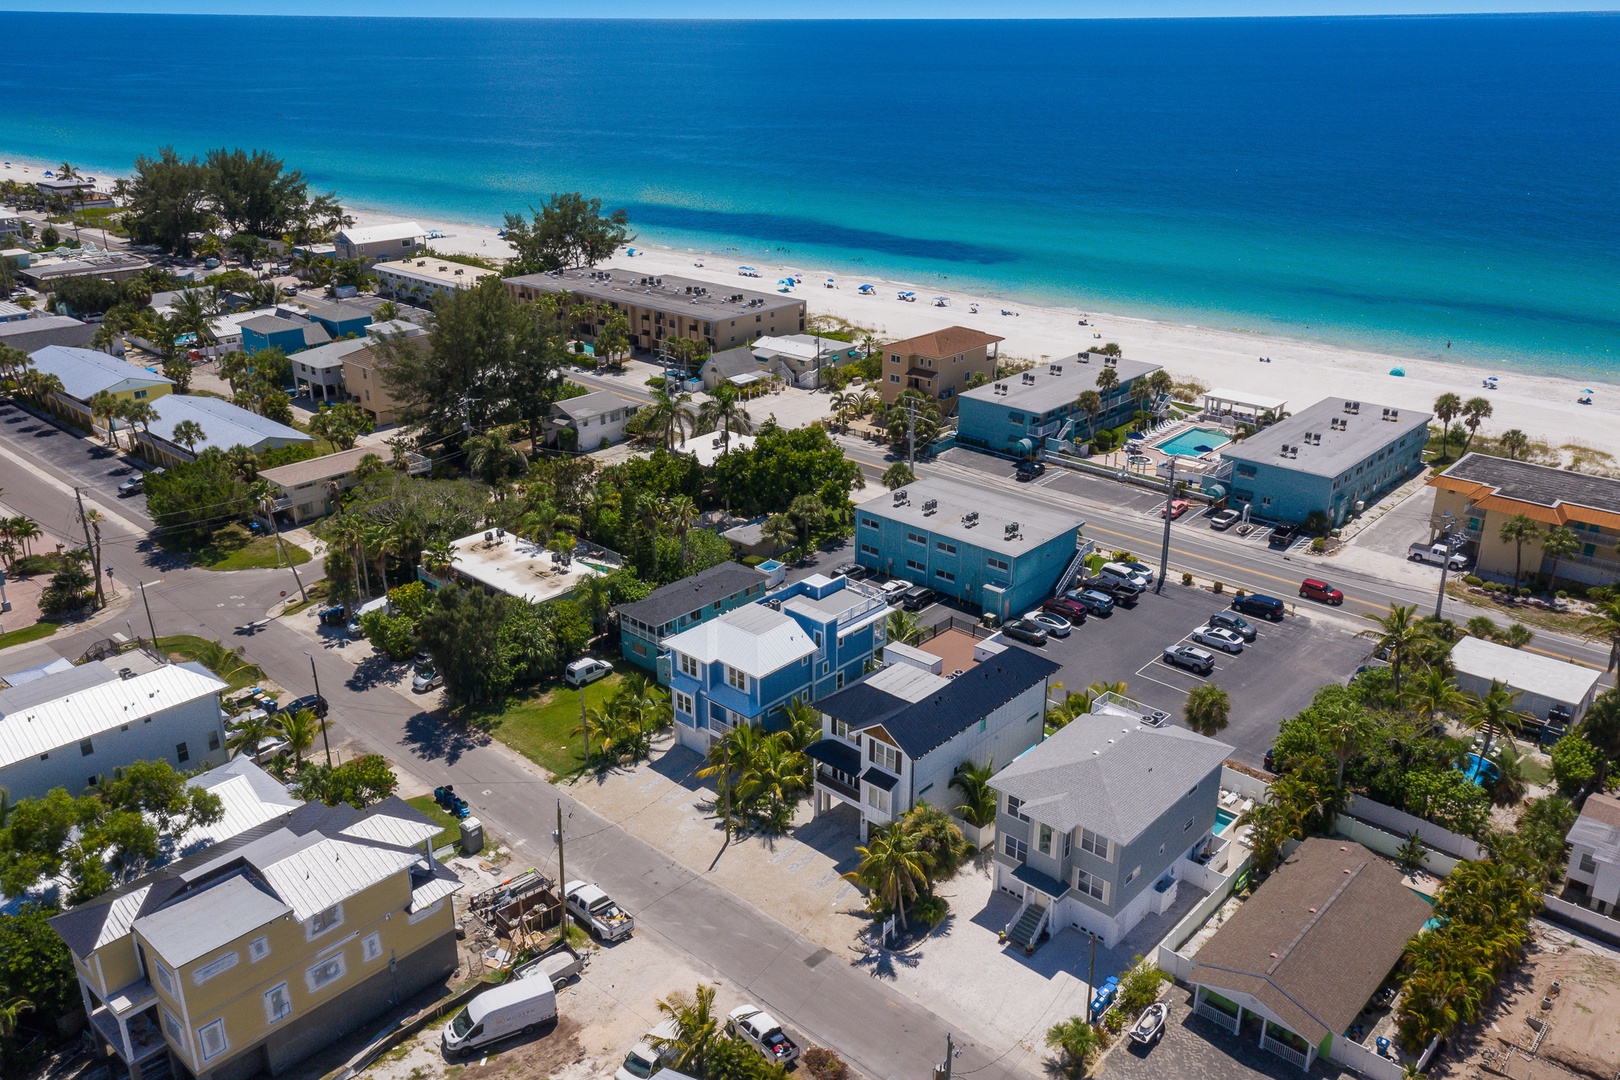 What A Catch - By Anna Maria Island Accommodations (6)